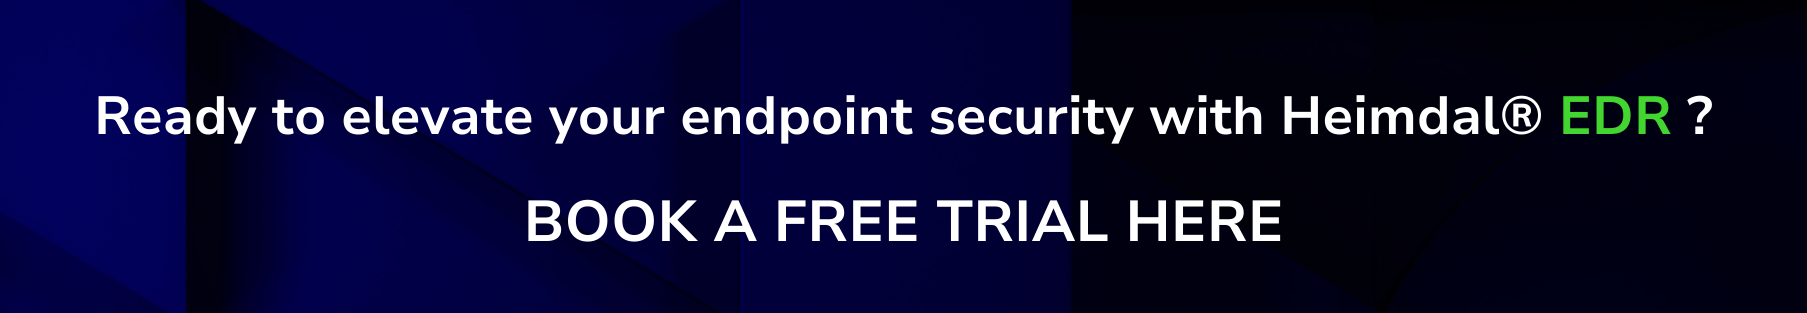 call to action, CTA, Free Trial, EDR security